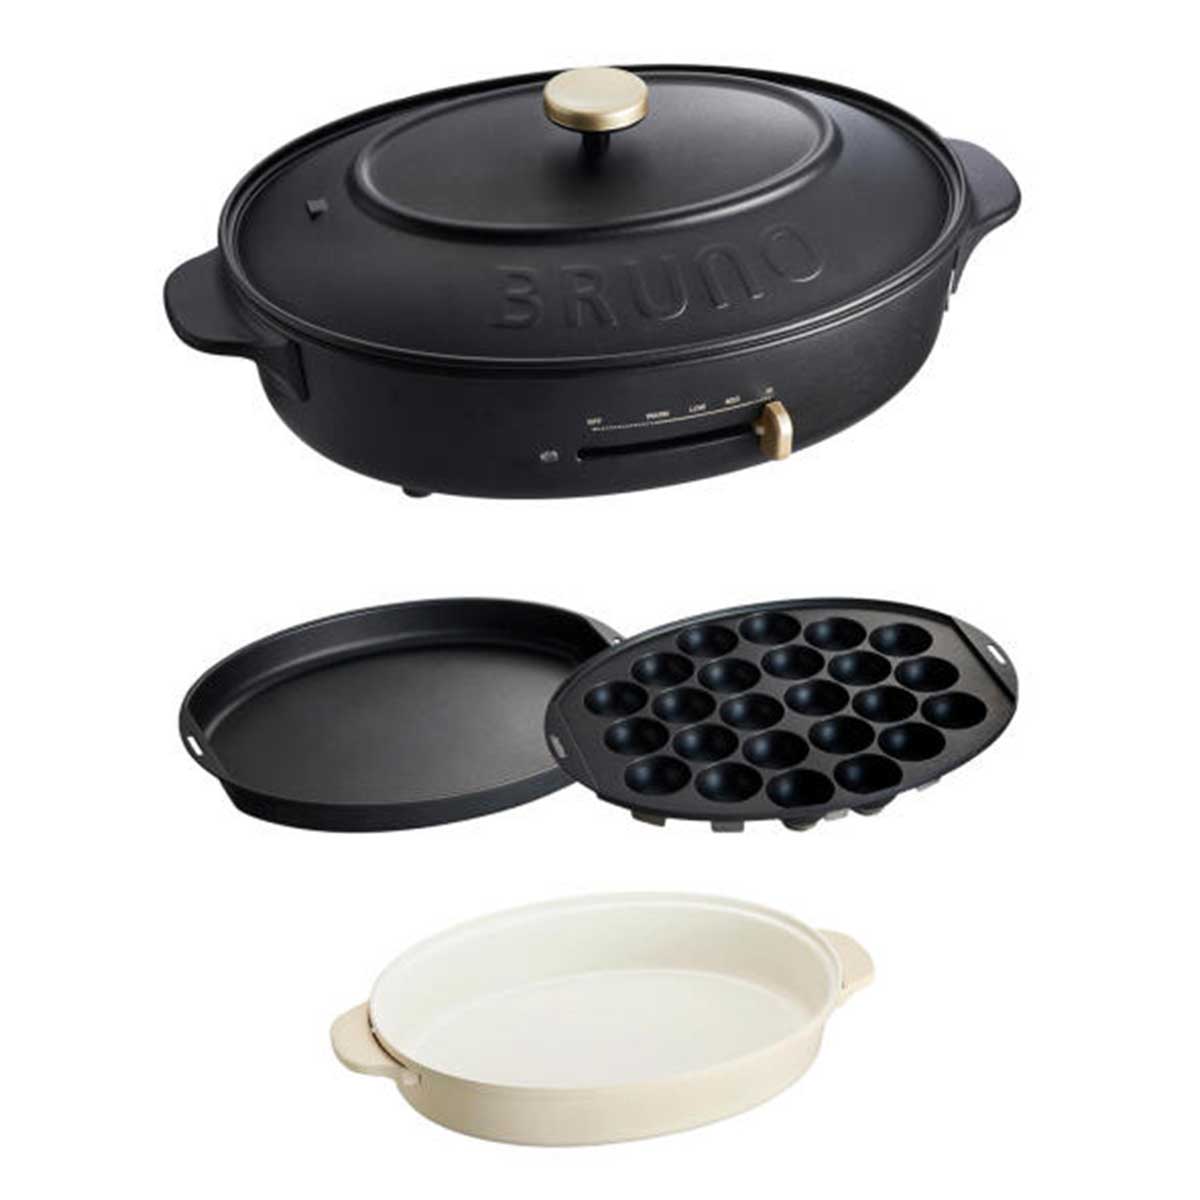 BRUNO「Oval Hot Plate」